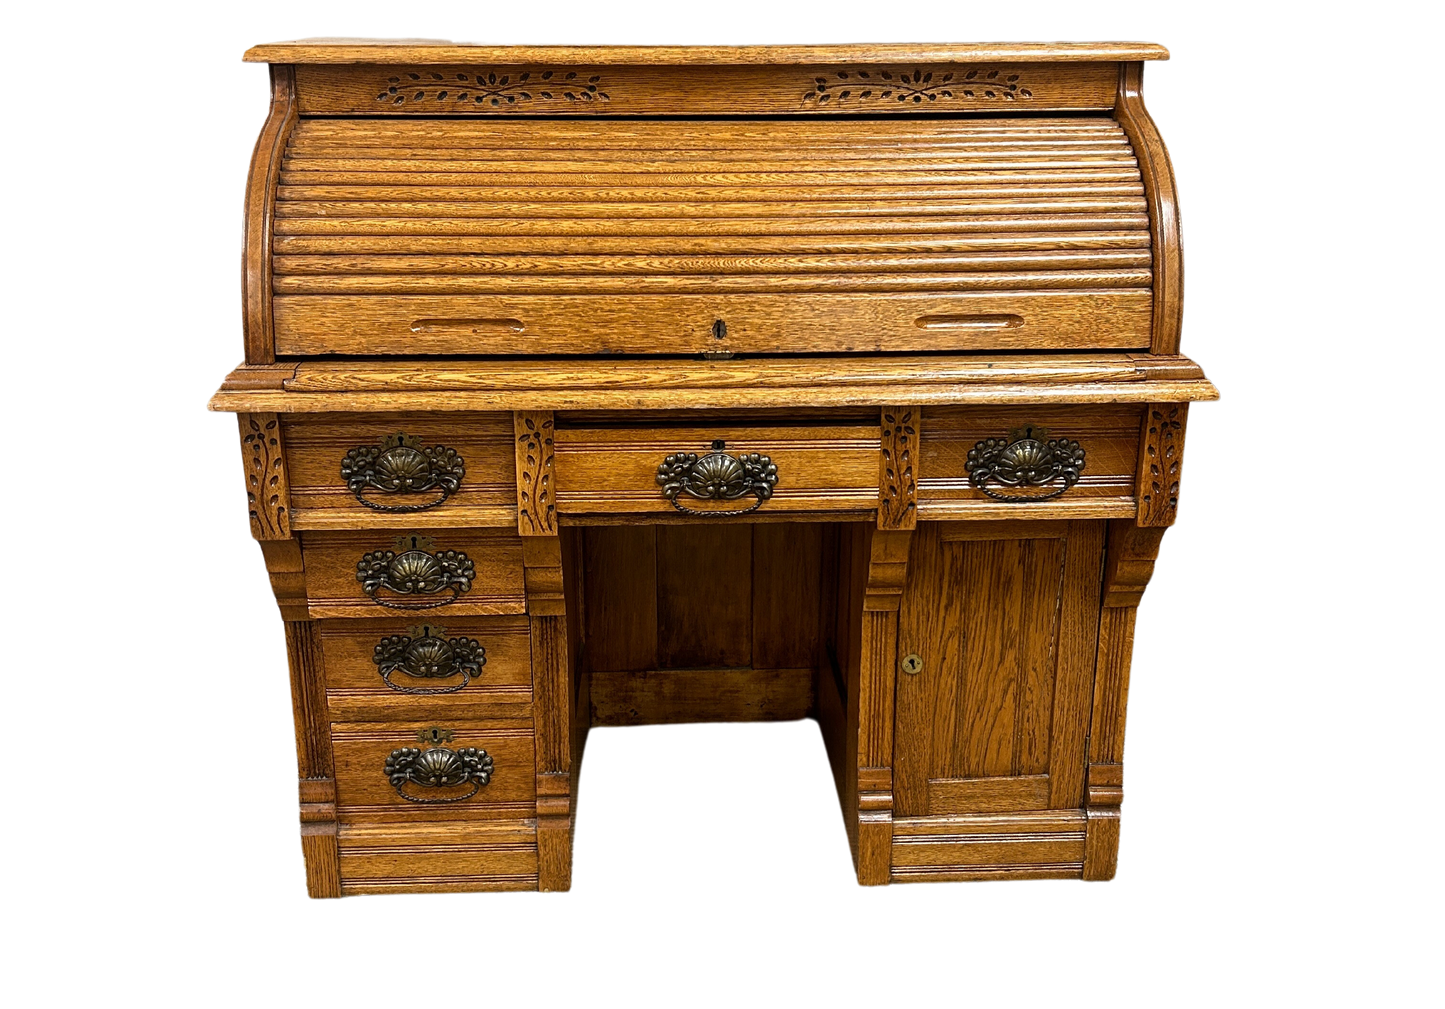 Solid oak Macey roll top desk with paneled details and spacious drawers, showcasing vintage charm and Macey craftsmanship. Available at the hearing clinic at Allard Audiology.